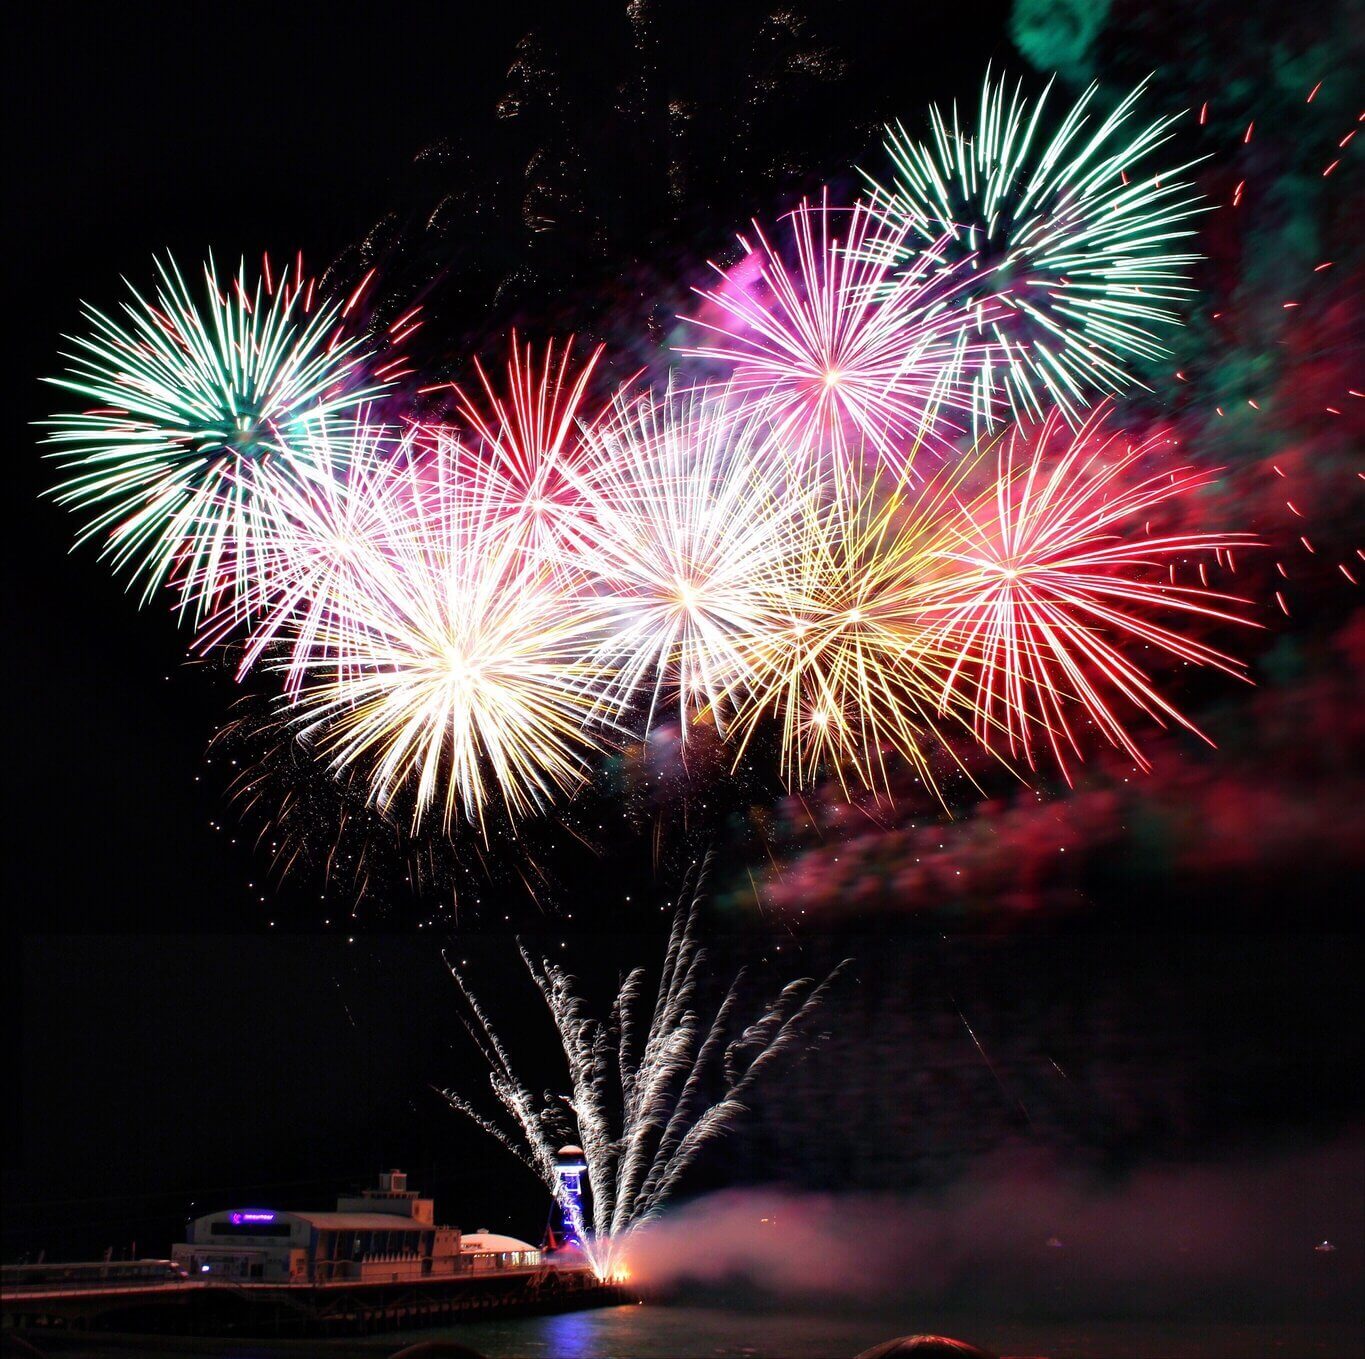 How to Take Photos of Firework Displays - Our Guide